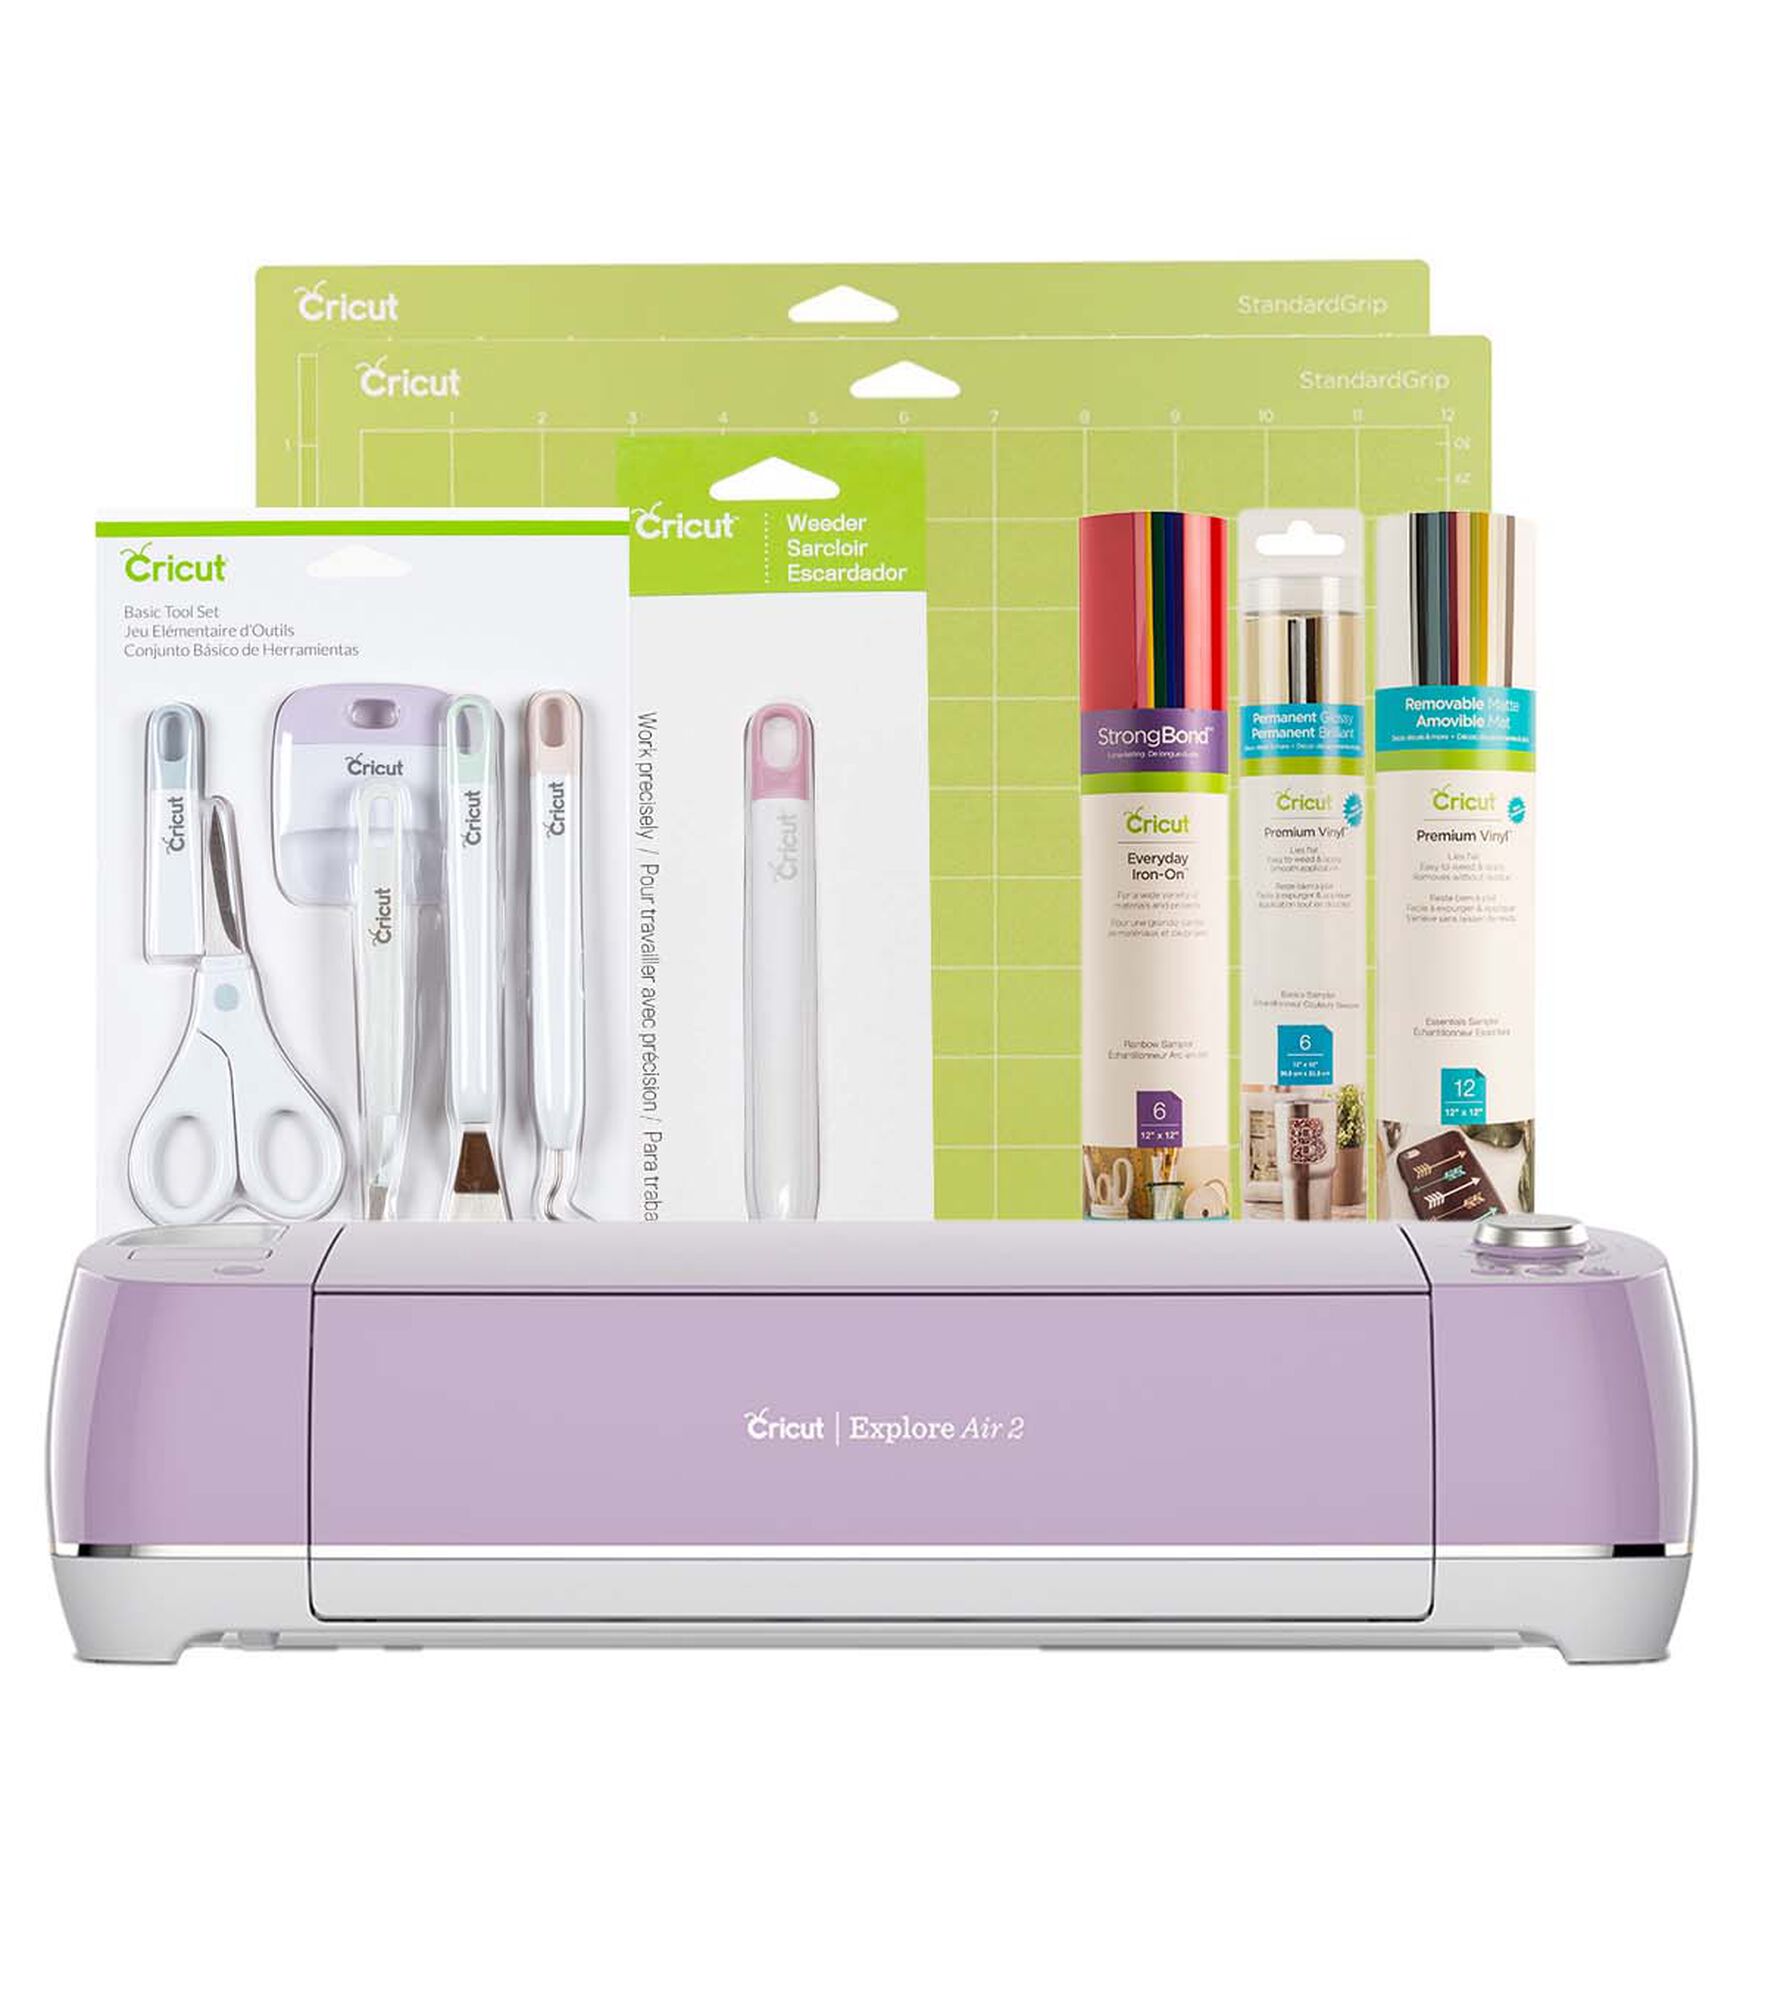 Cricut launches new on-trend Everyday Iron-On colours - Reflective Rainbow,  Mint, Coral and Rose Gold plus Skin-Tone Iron-On and Vinyl Samplers -  Impulse Gamer